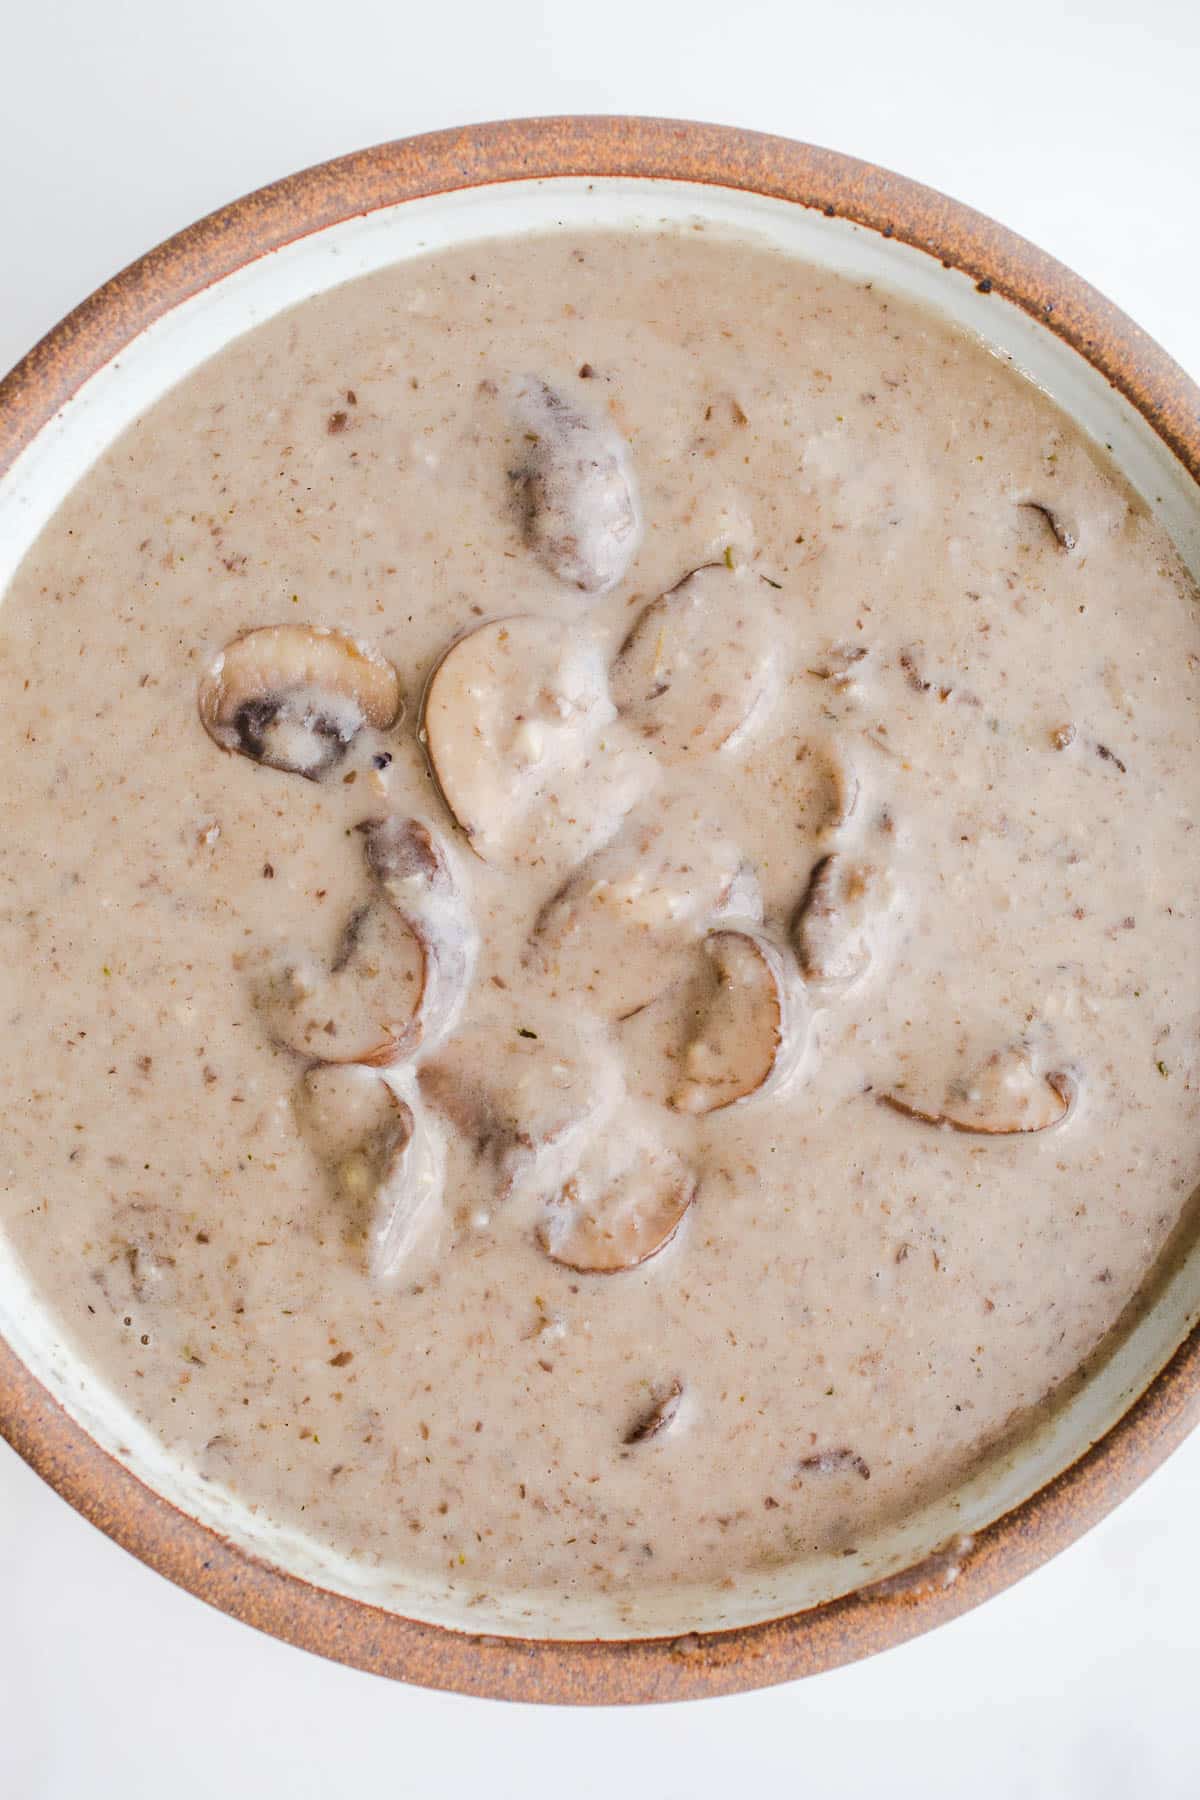 Creamy mushroom soup in a rustic bowl on a marble surface.